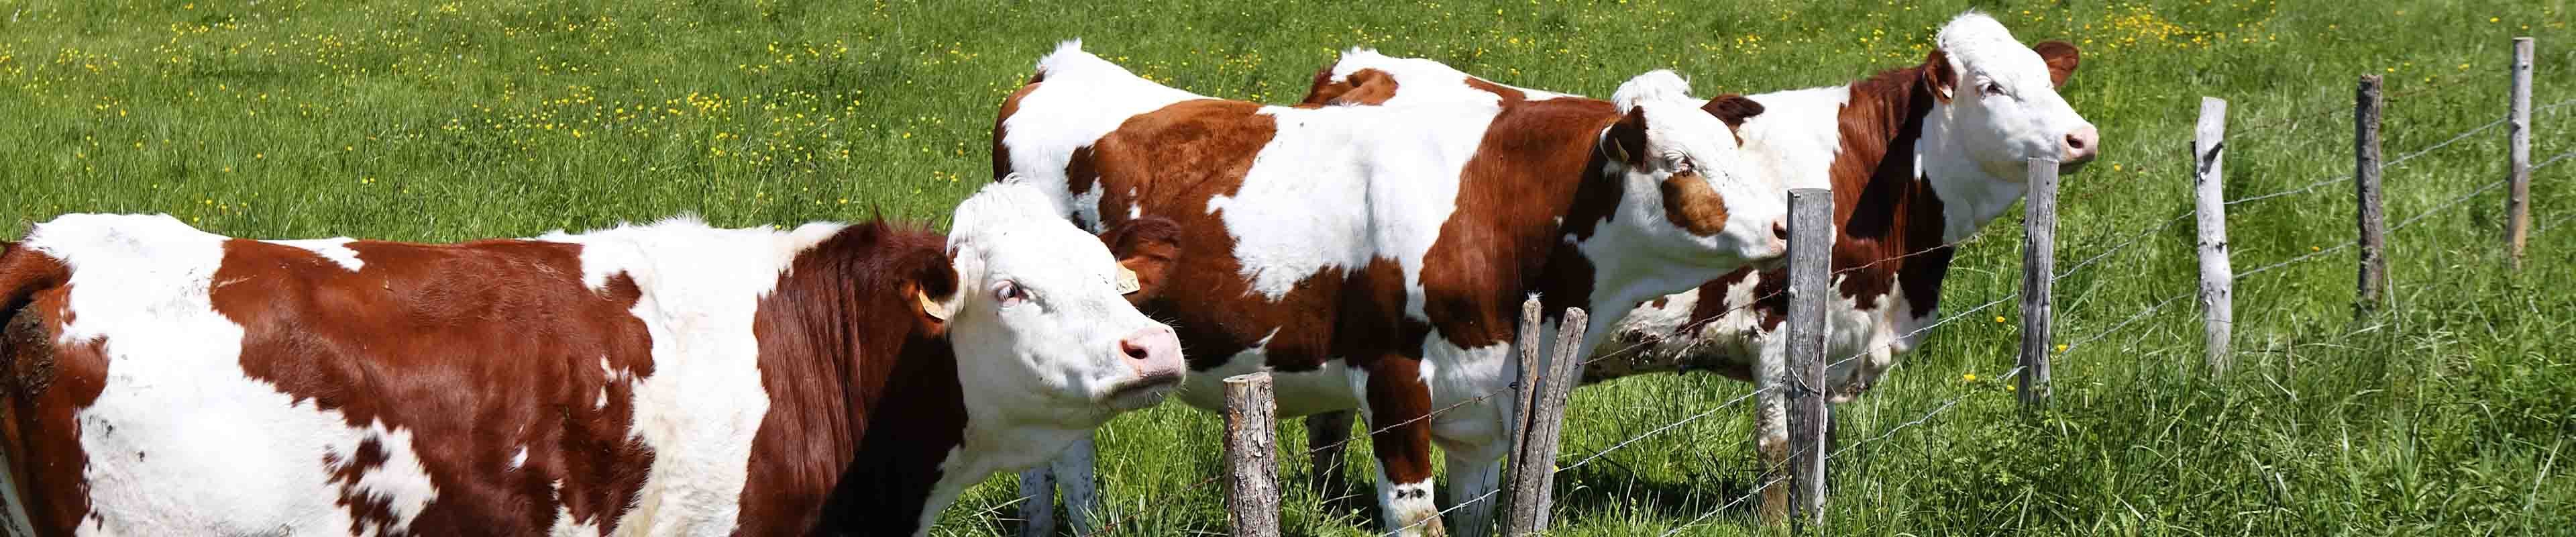 Image of three cows behind a fence to prevent theft